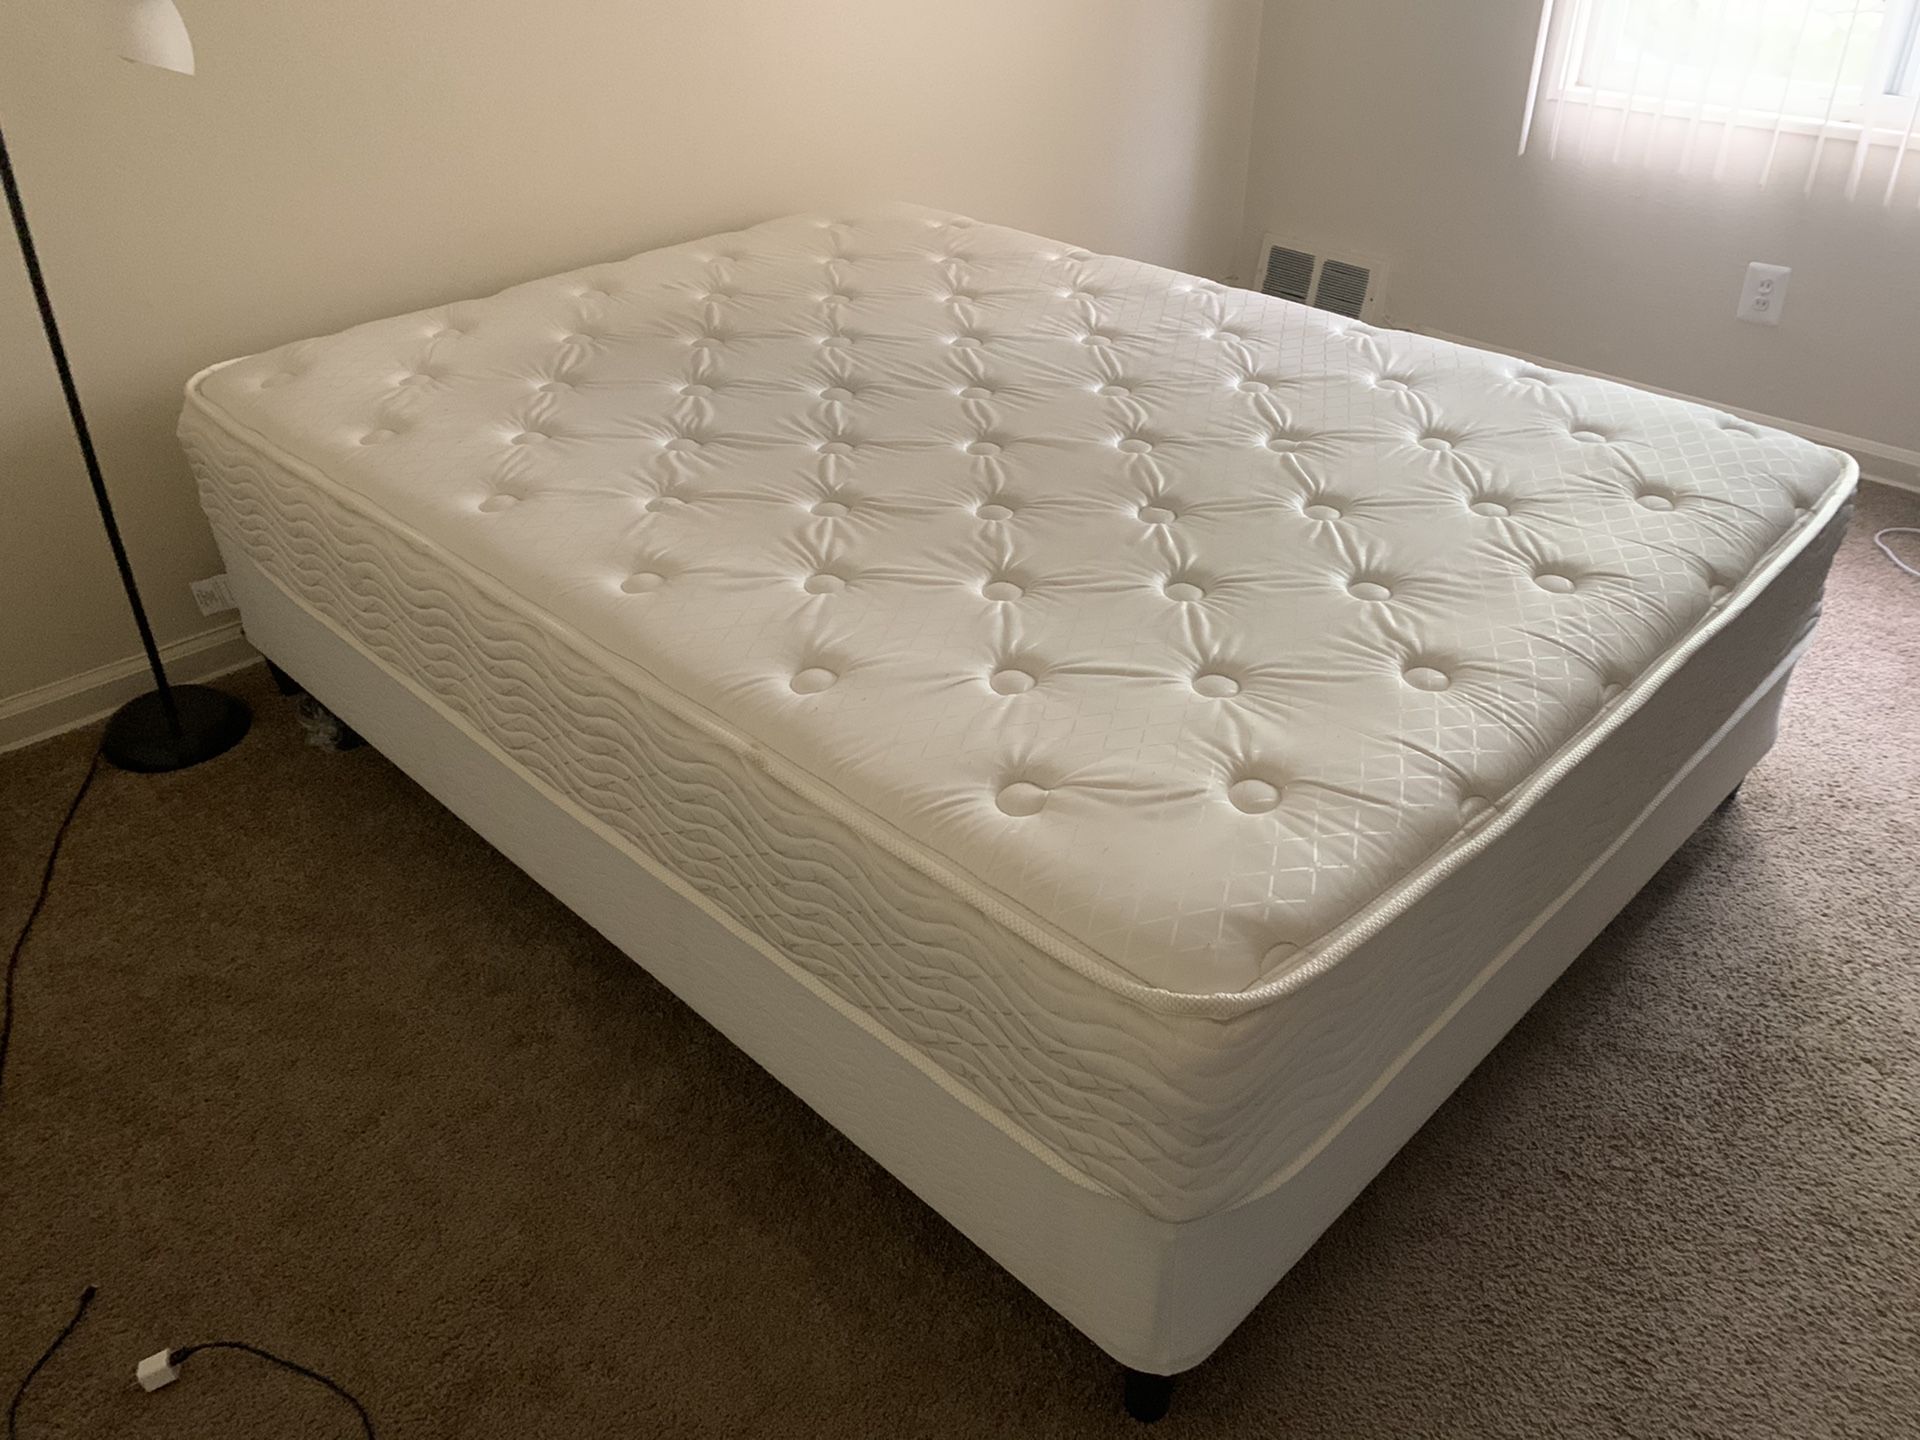 Queen size mattress and a box spring. In excellent condition